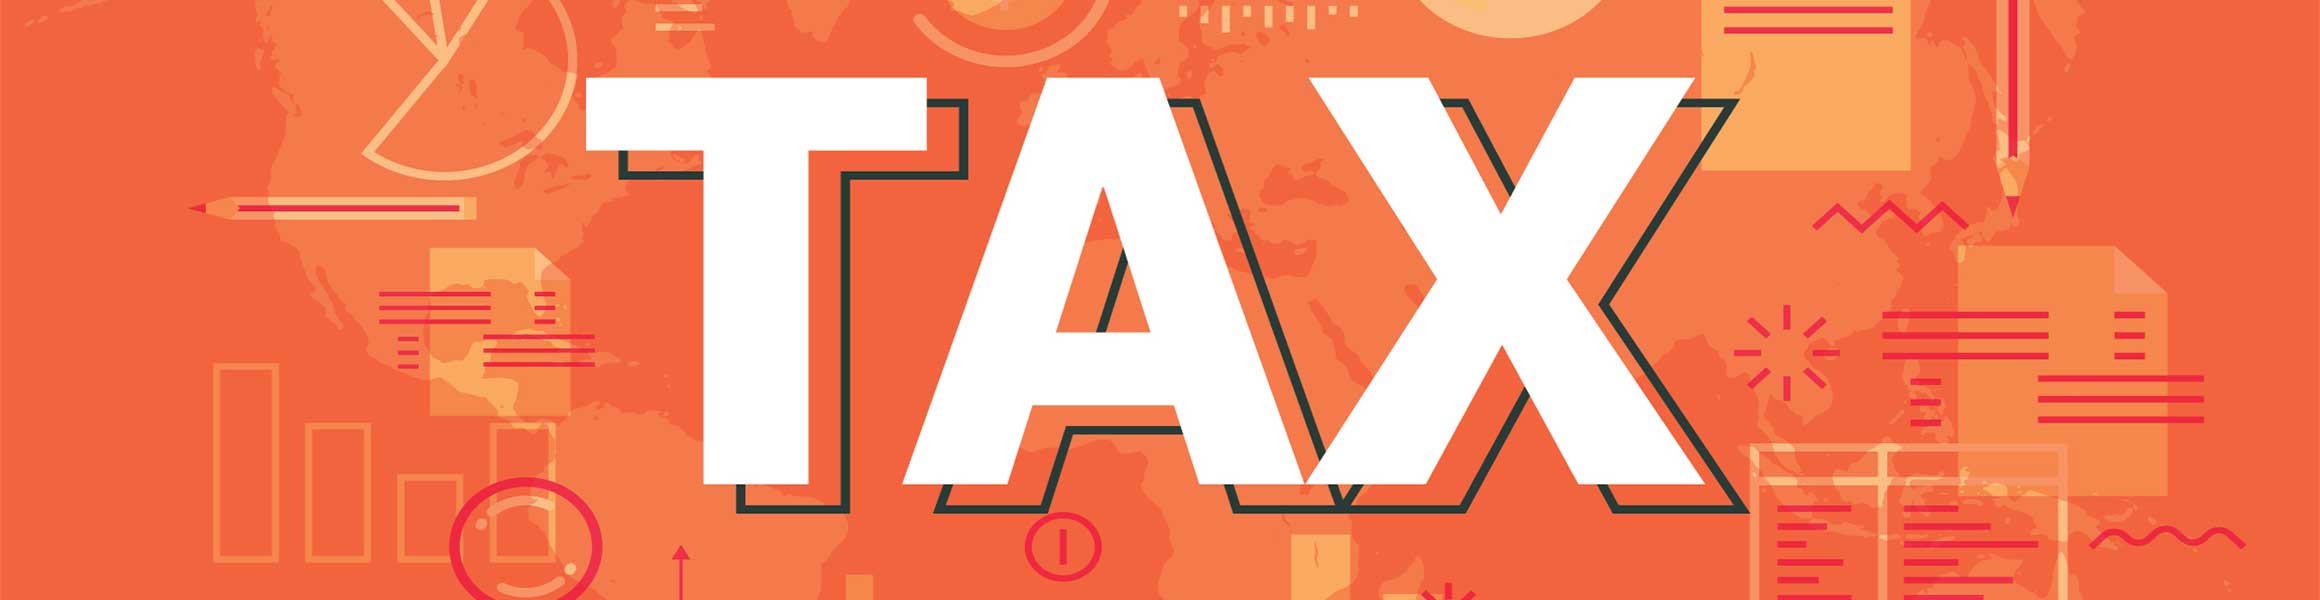 The word tax on an abstract orange background